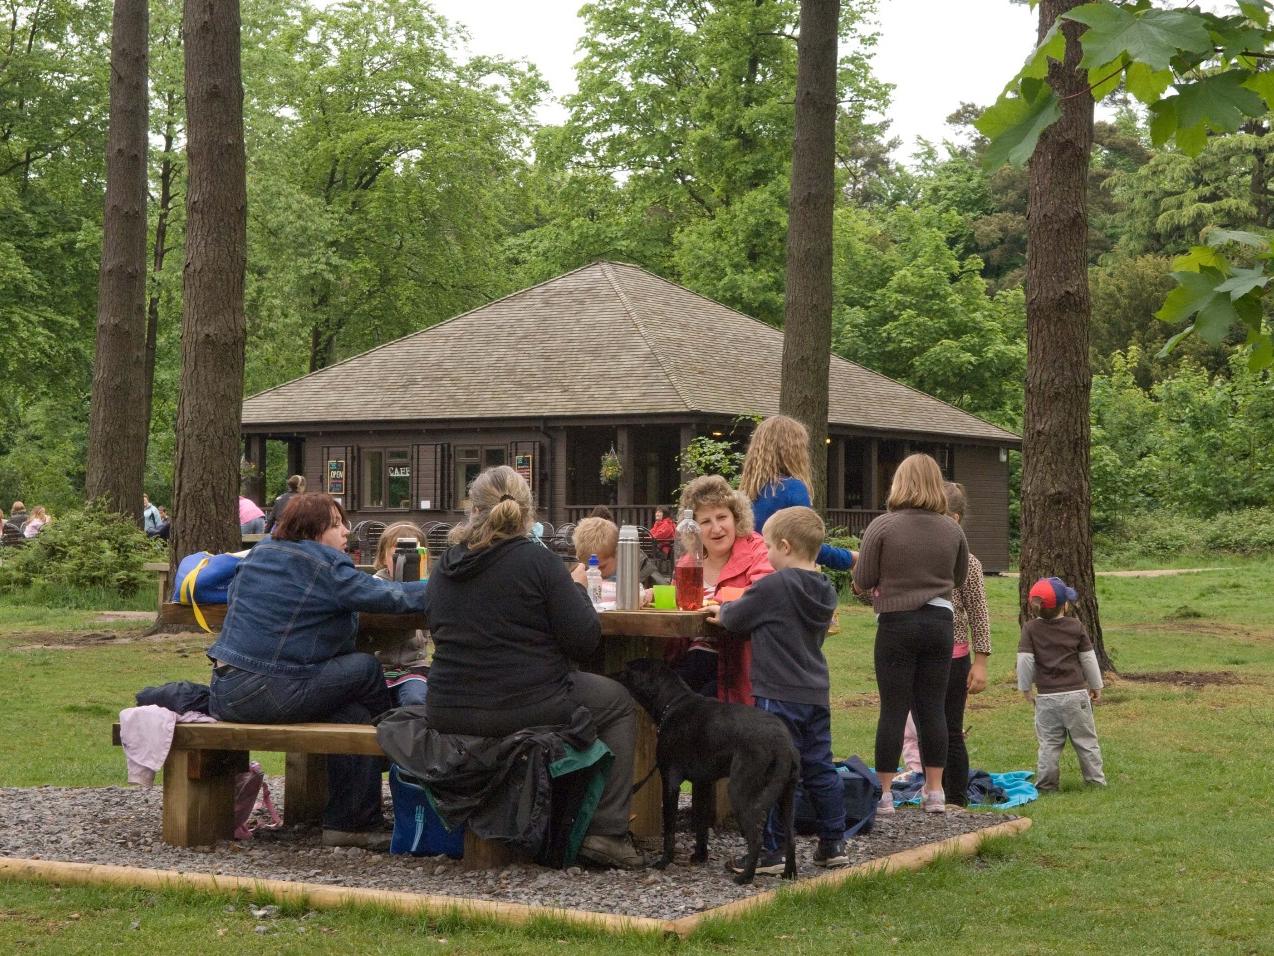 The area is a real leisure hive and boasts a cafe, picnic grounds and the Go Ape centre too